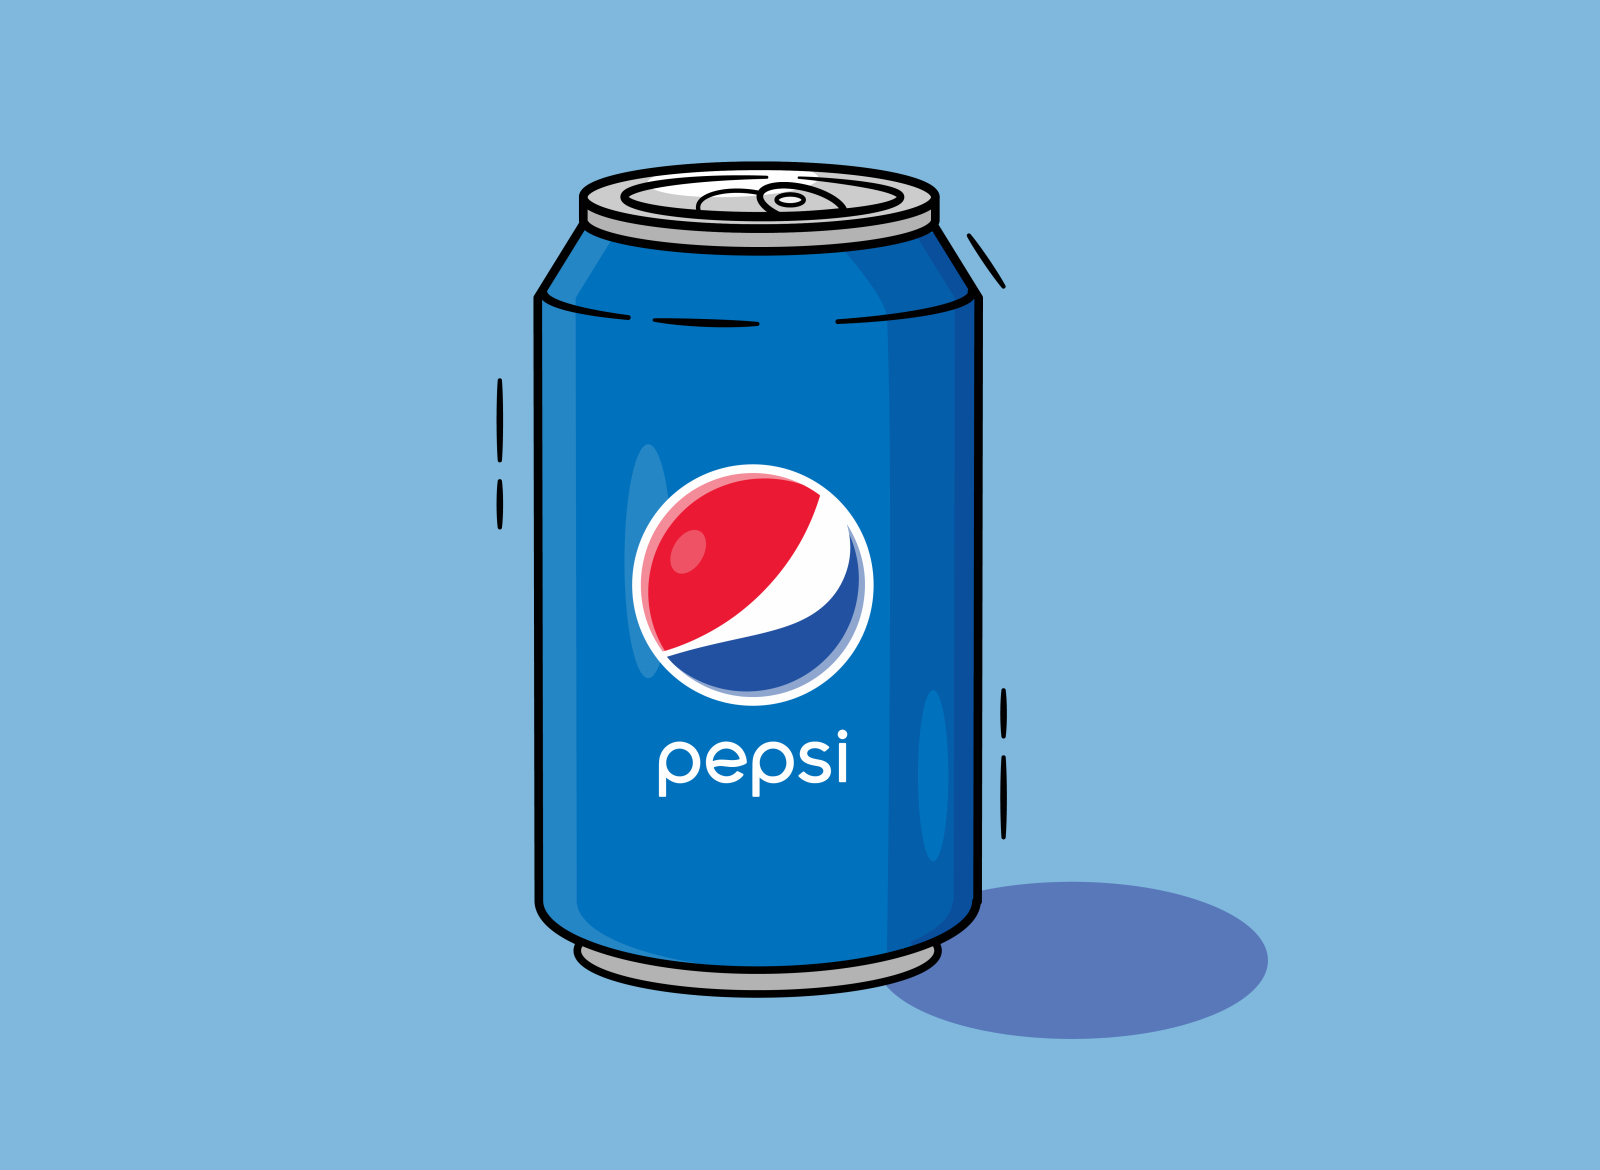 PEPSI by Rafly dt on Dribbble